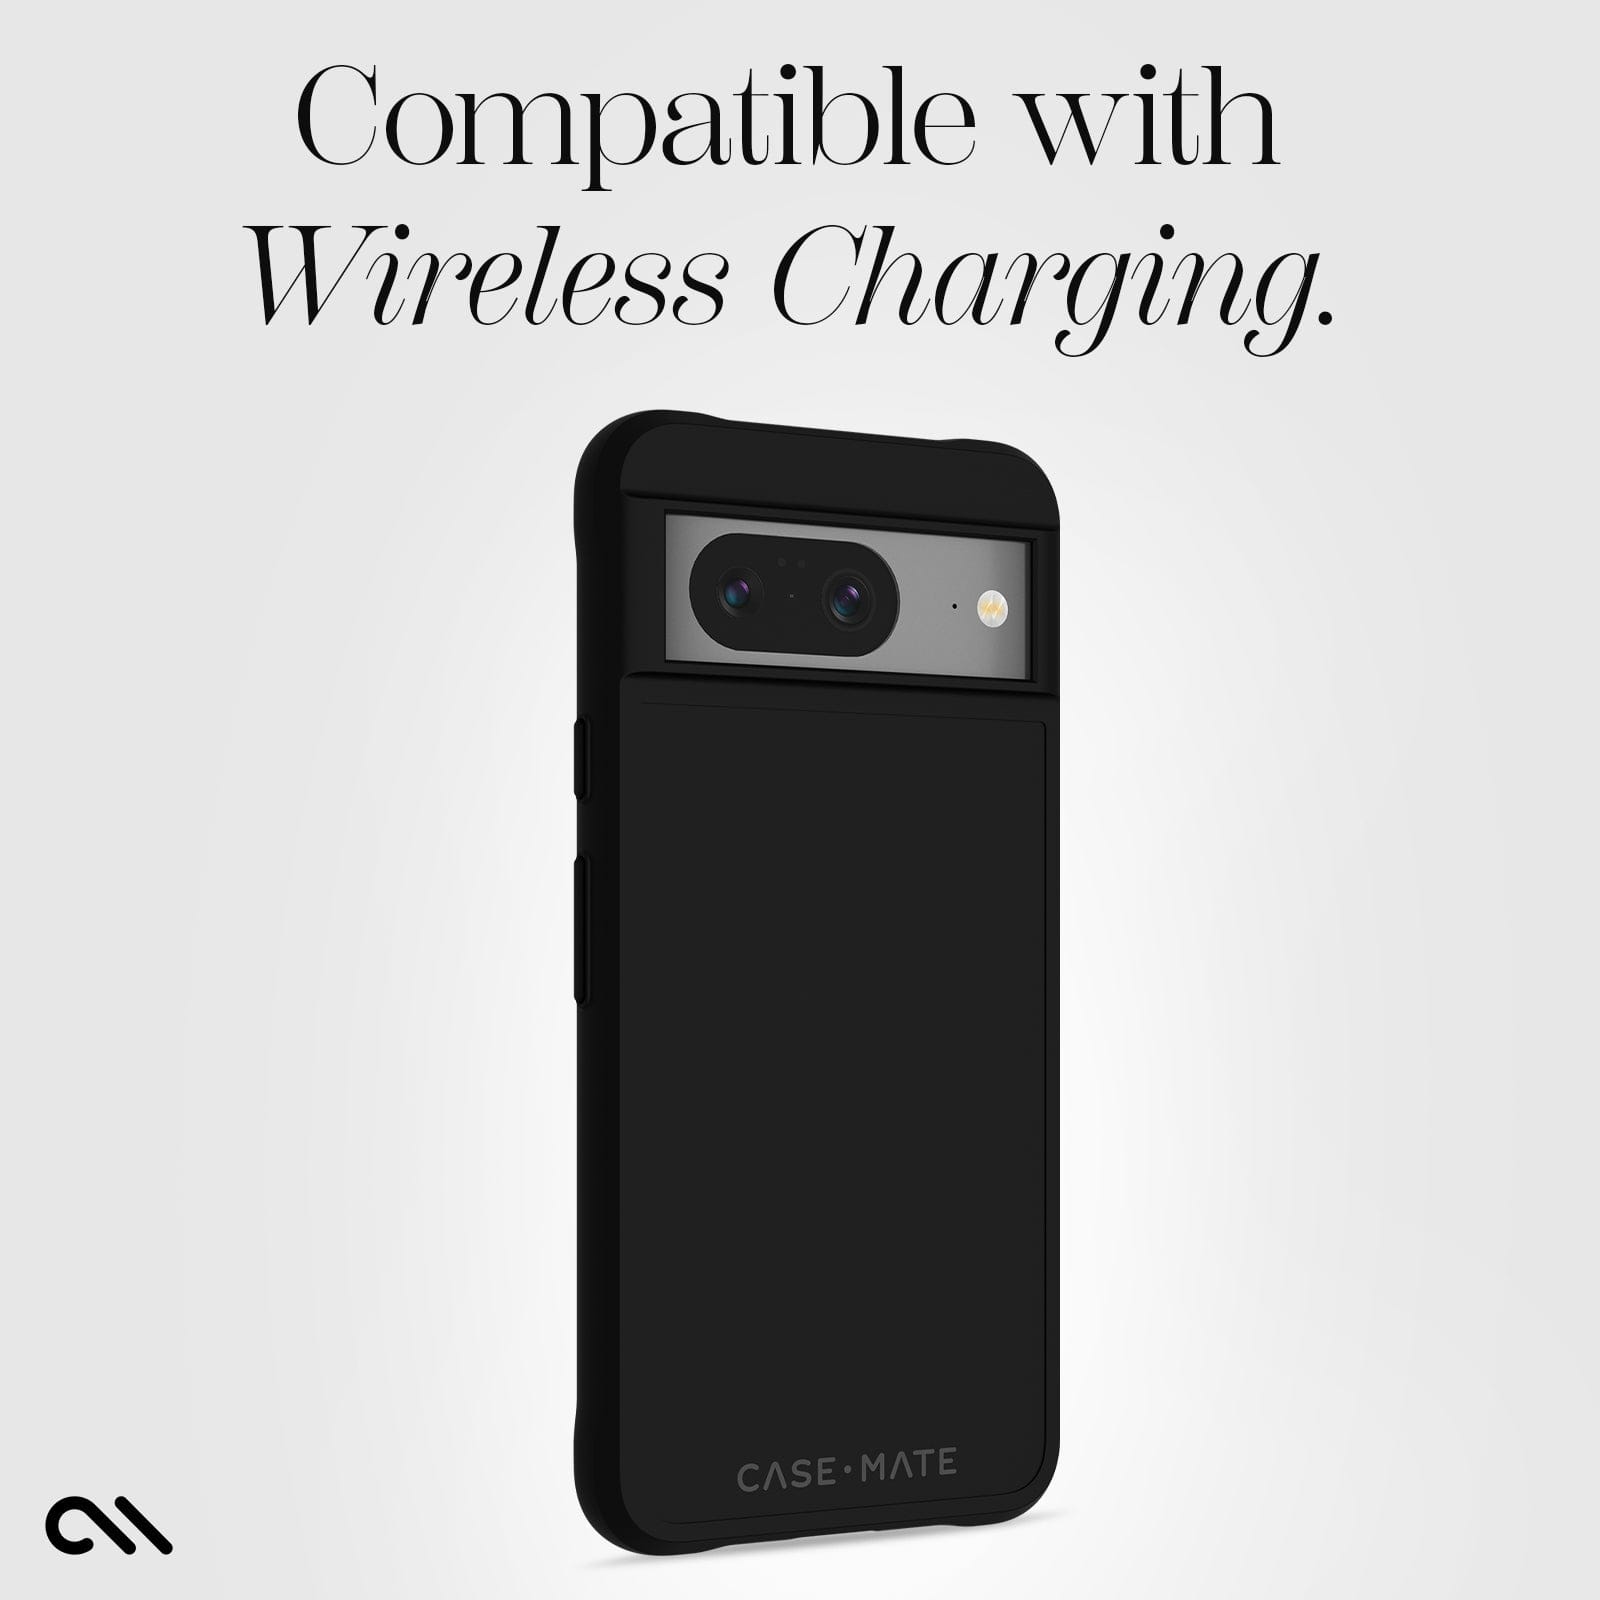 COMPATIBLE WITH WIRELESS CHARGING